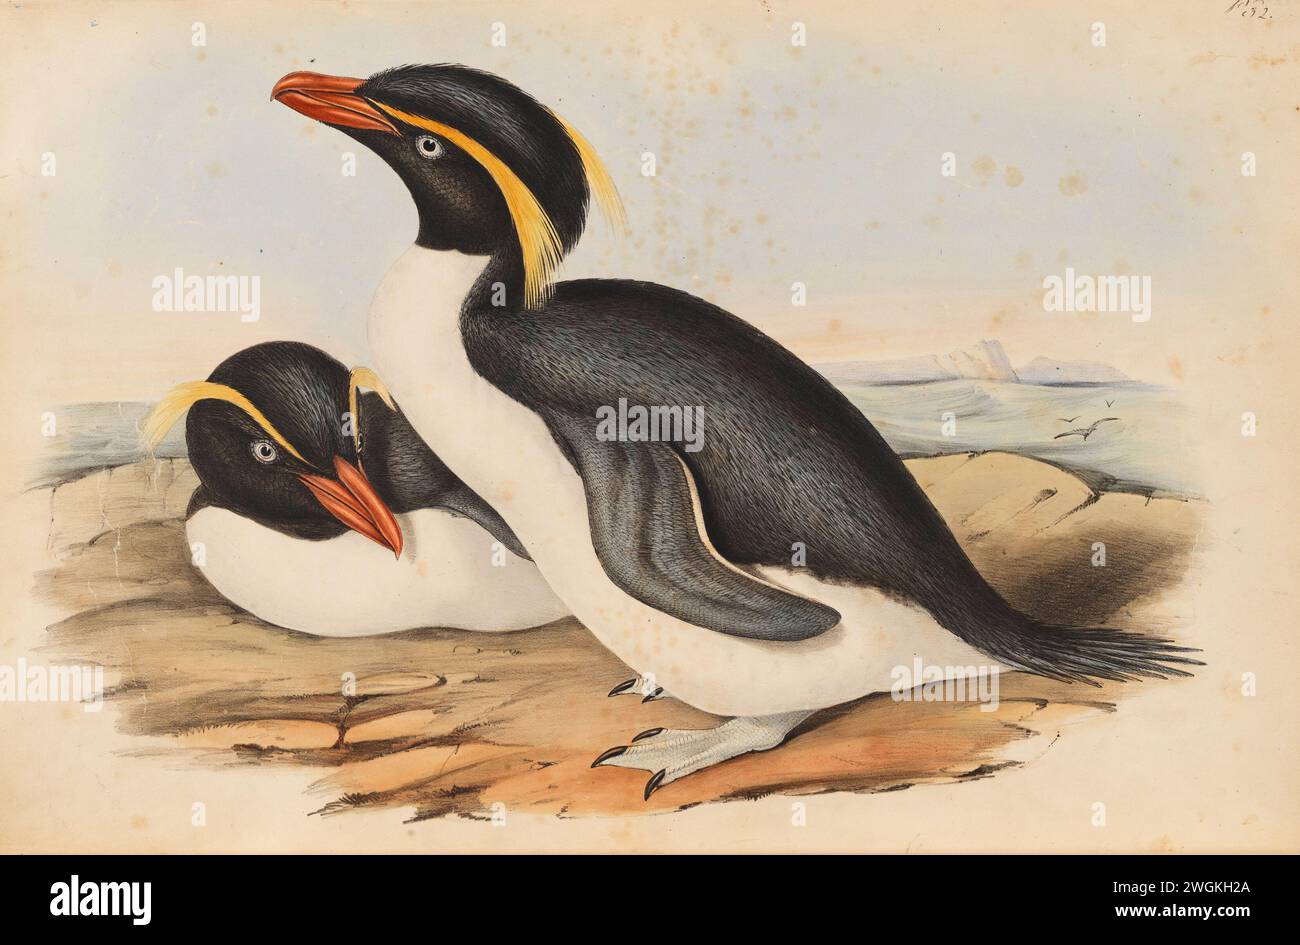 Eudyptes chrysocome , Crested Penguin .Plate from the Book Birds of Australia from John Gould, with illustration by his wife Elizabeth Gould, and from her drawings after her passing.   Published in eight volumes (including supplements) from 1840 to 1869.  species now known as Southern rockhopper penguin Stock Photo